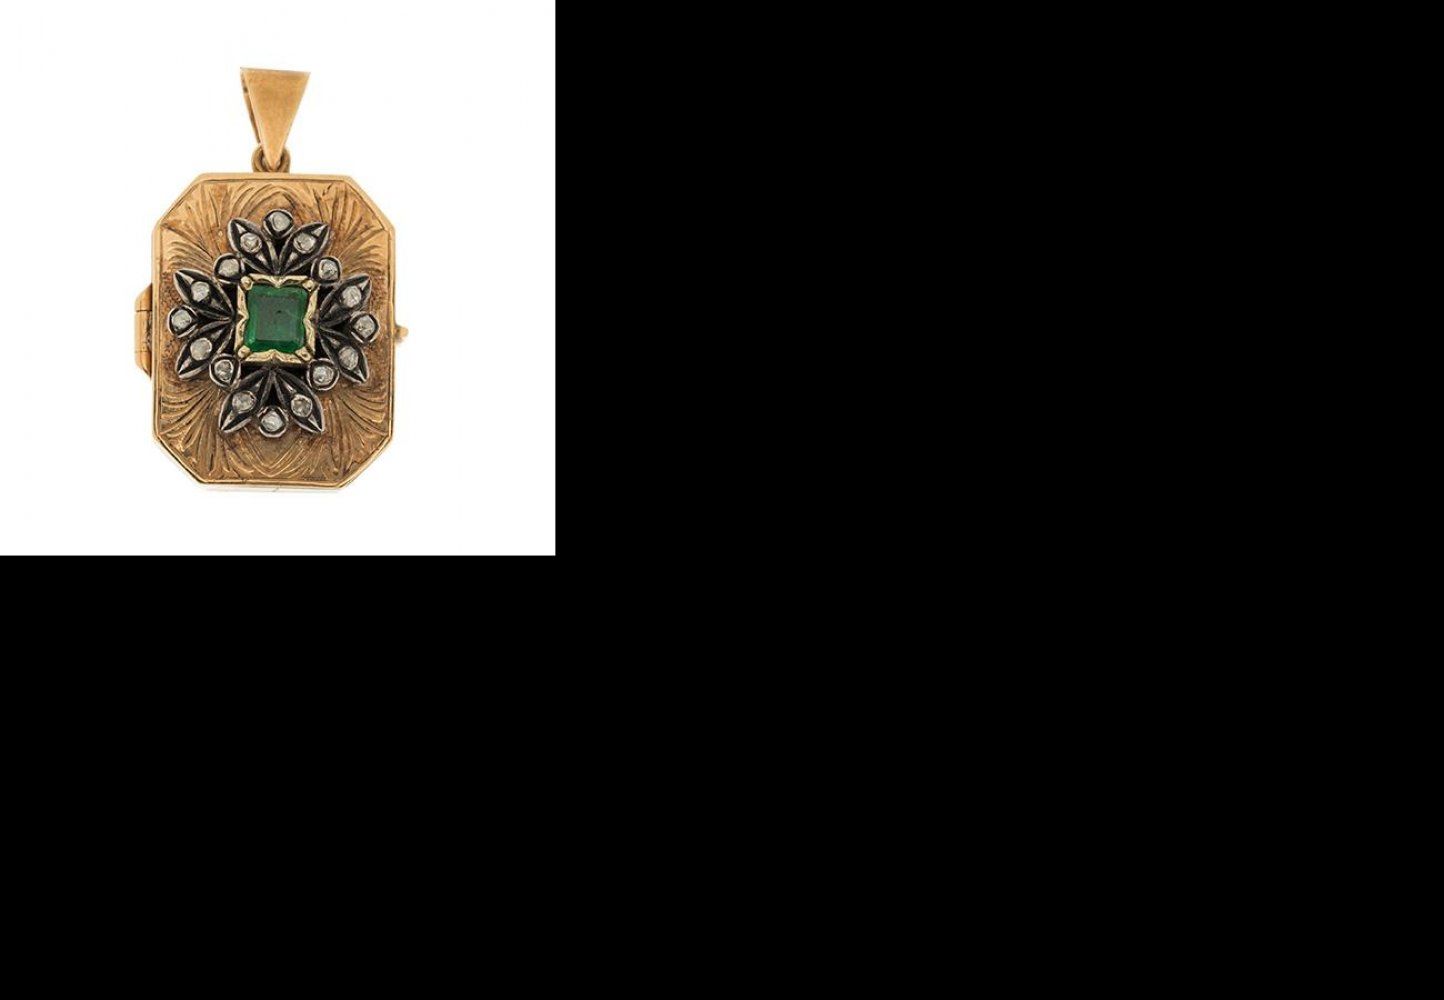 XIXth century coat-of-arms pendant in 18K yellow gold with emerald and rock-cut &hellip;